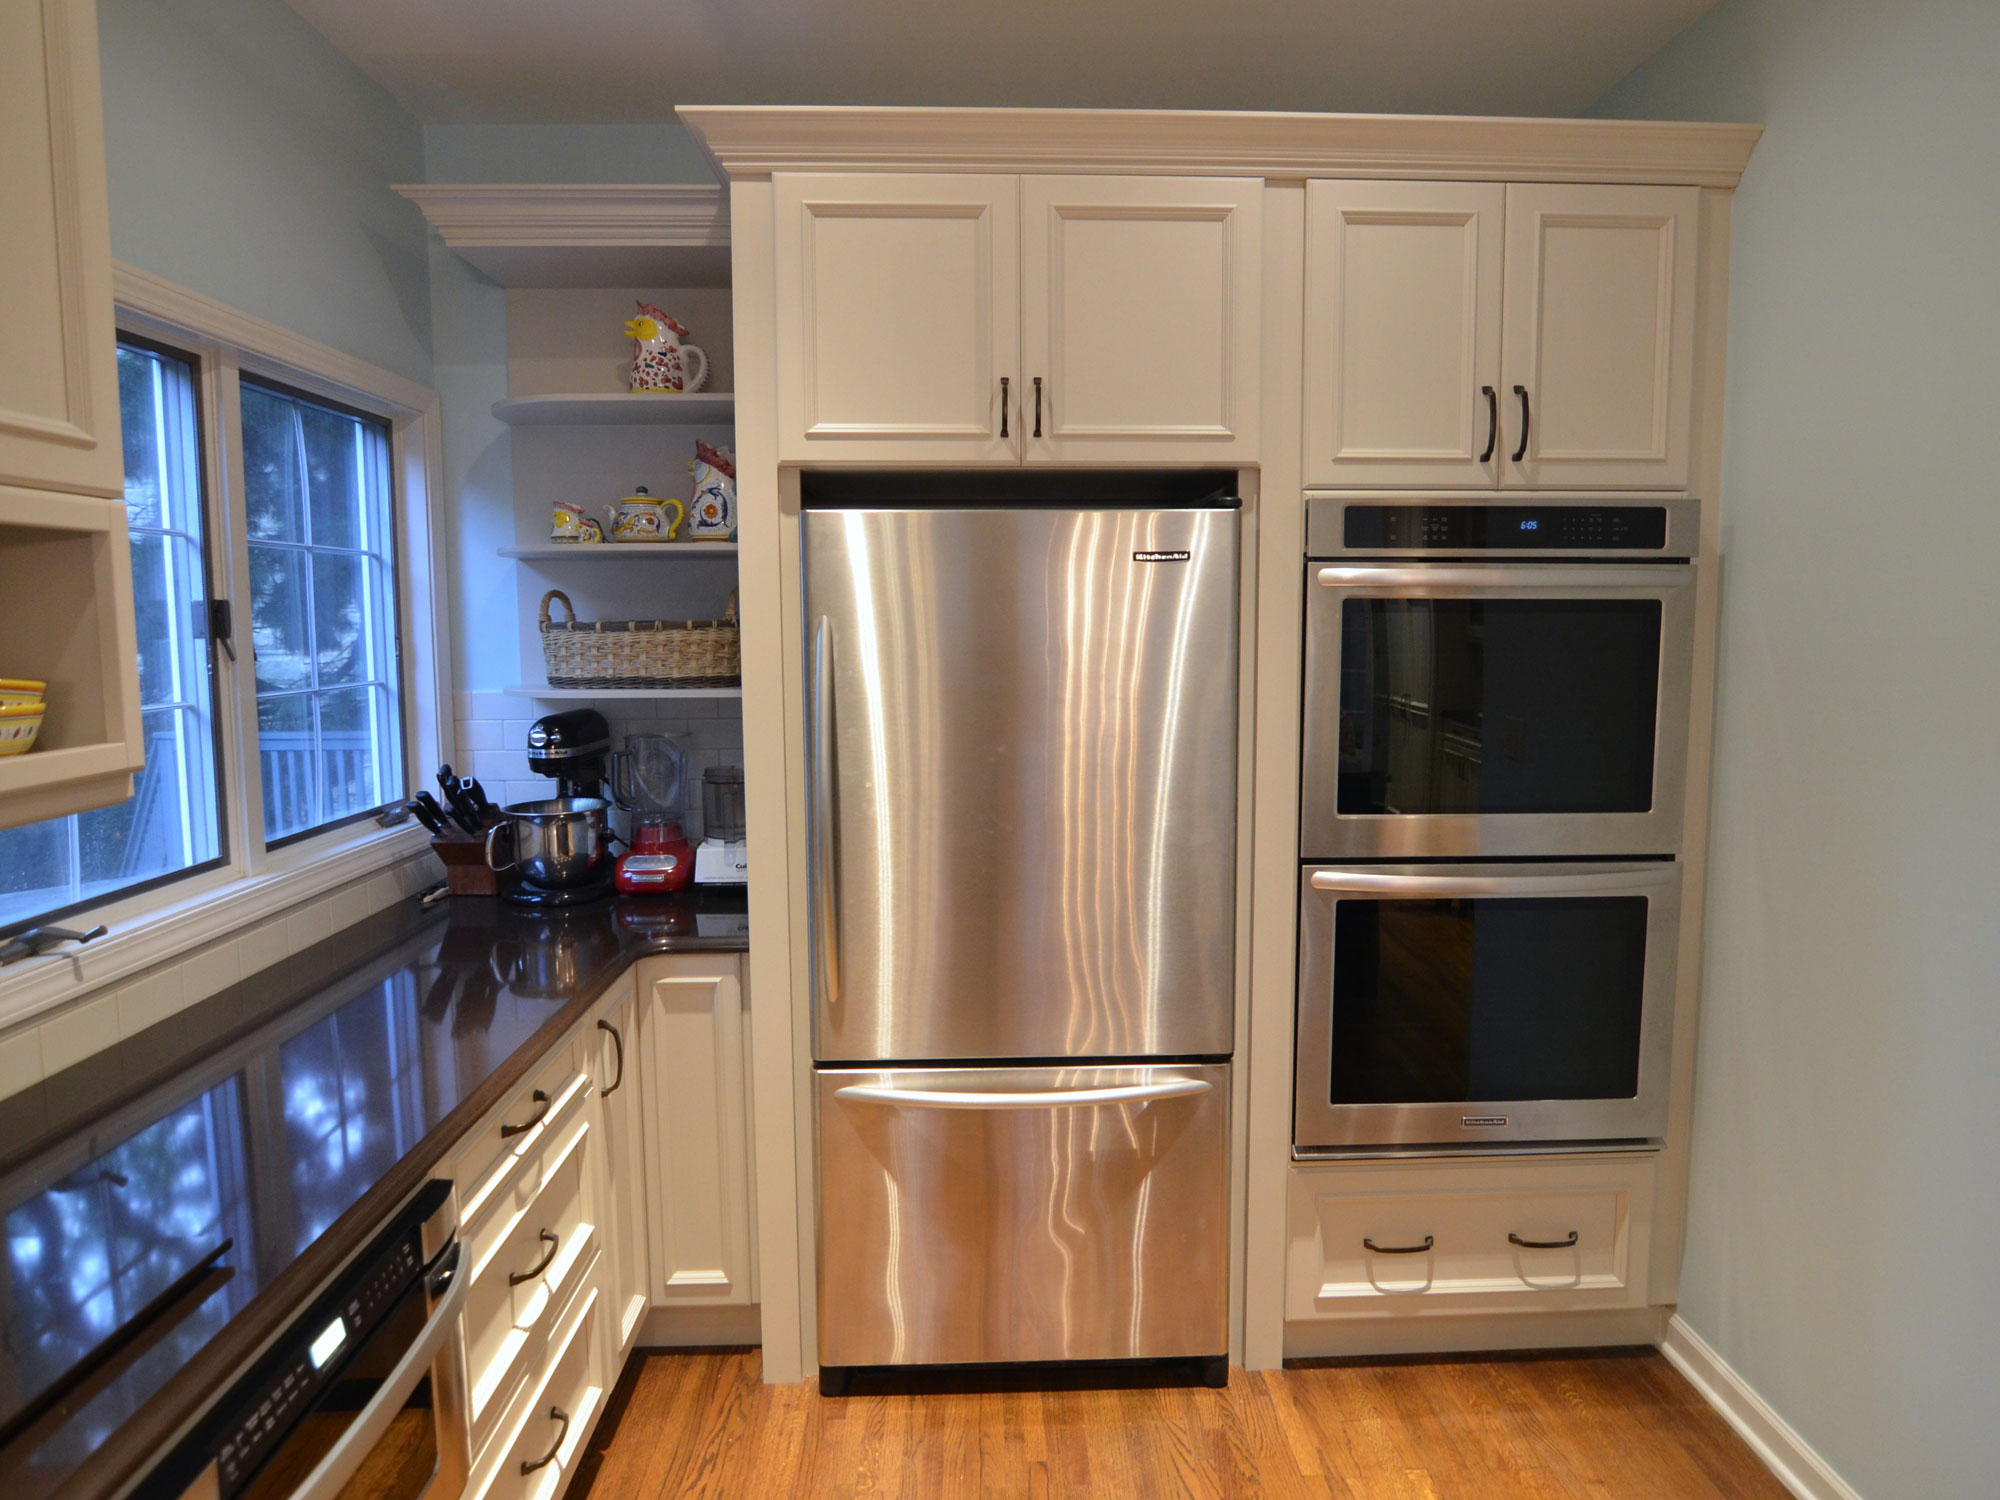 Kitchen remodeling in Naperville, IL. Kitchen refrigerator and oven area redesign.